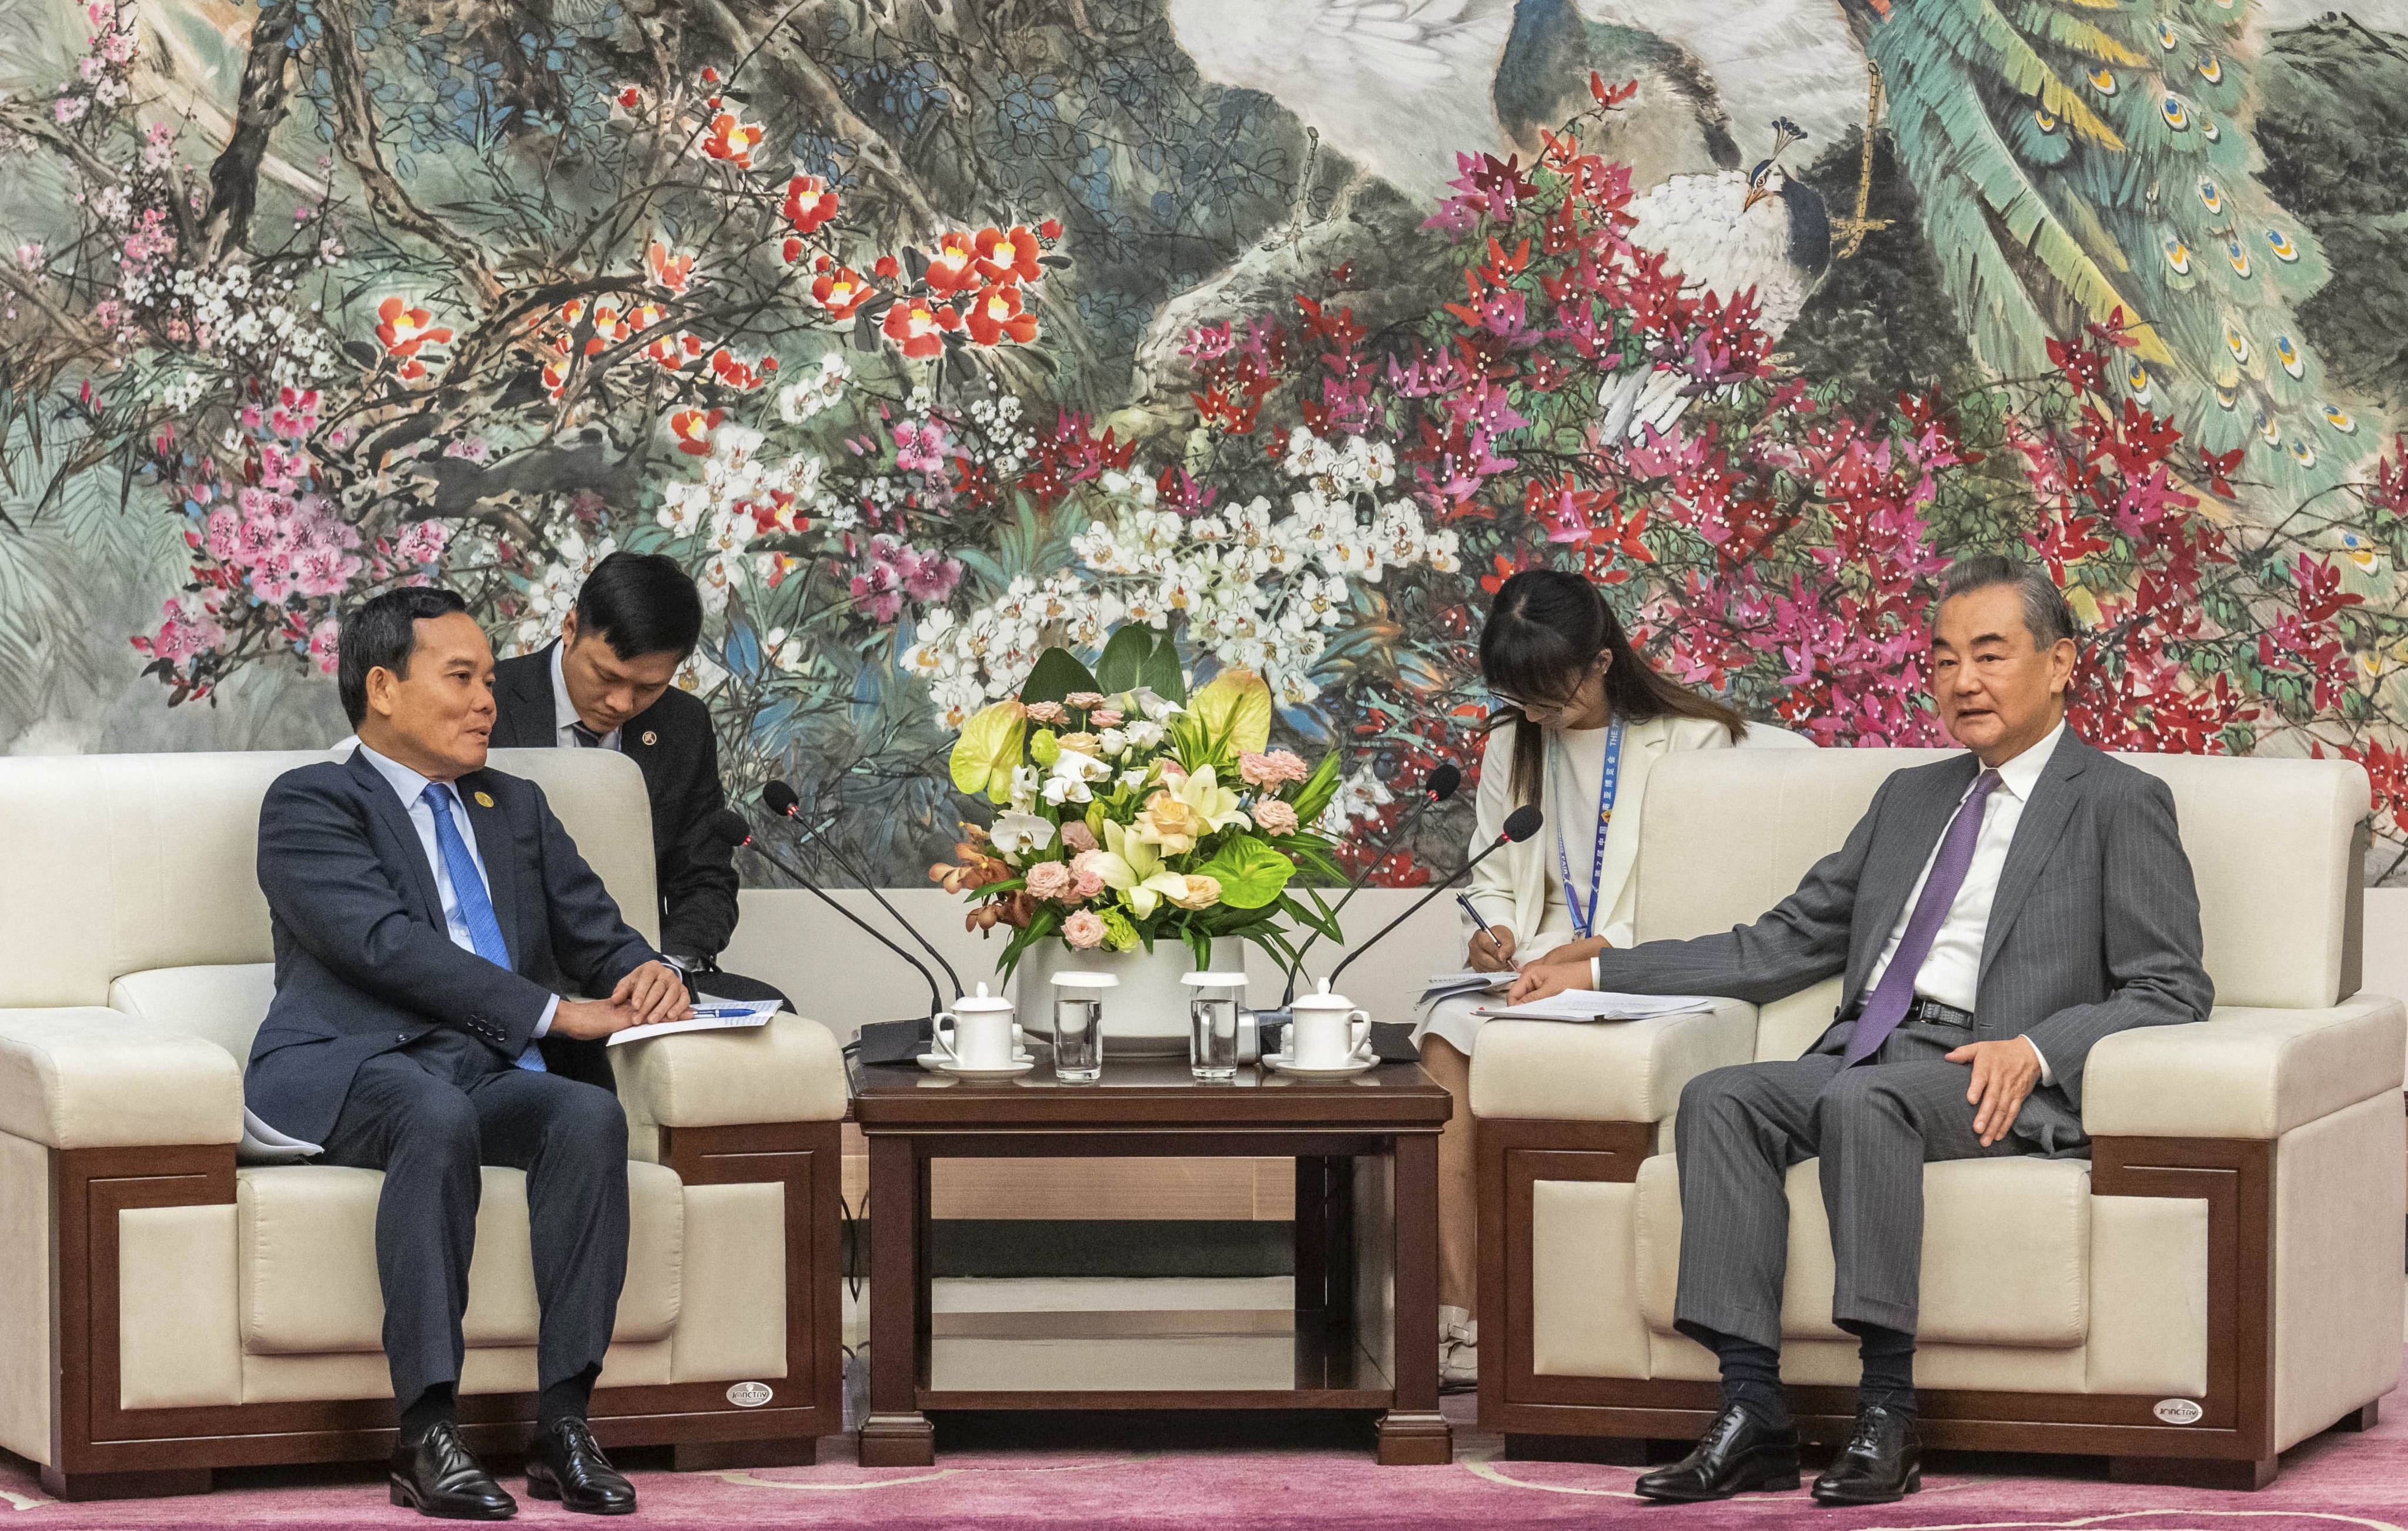 Vietnam’s Deputy Prime Minister Tran Luu Quang meets Wang Yi, director of China’s Office of the Central Commission for Foreign Affairs in Kunming. Tran Luu Quang is attending the 7th  China-South Asia Expo in Kunming. Photo: Xinhua